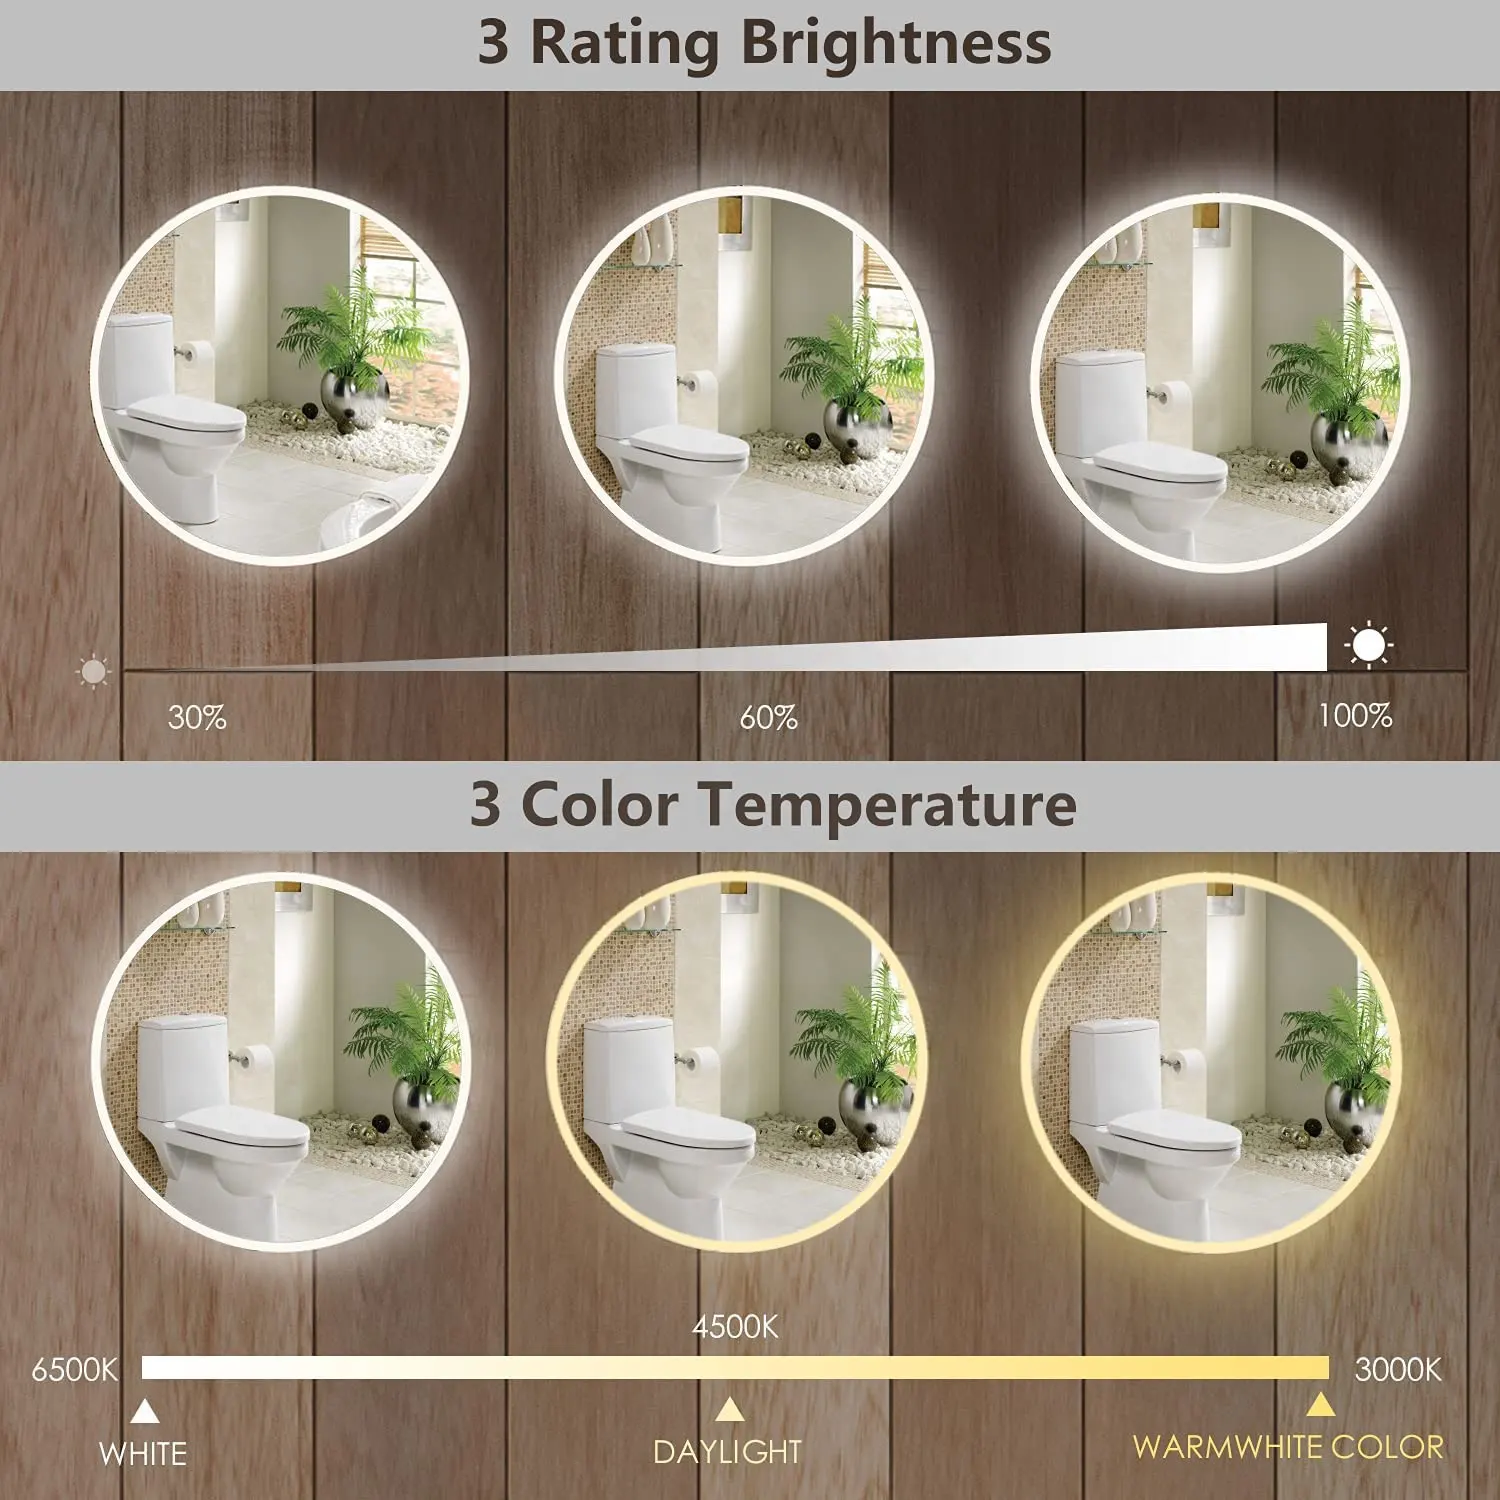 Dimmable Adjustable. Simply touch the dimmer Switch button to change light intensity from glimmer, normal to brightest. Smart mirror provides your life with more free choices.